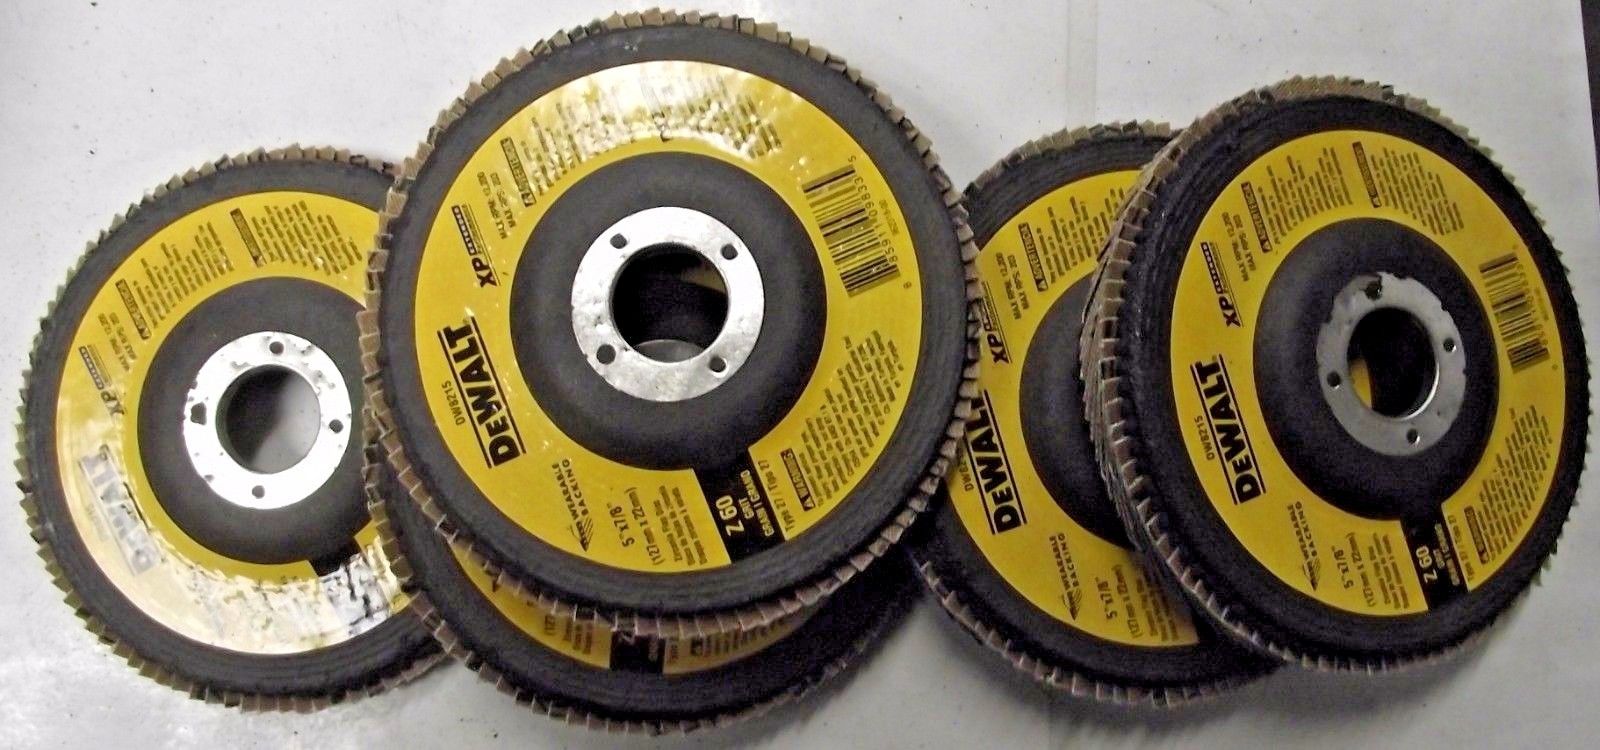 DEWALT DW8212 4-1/2-Inch by 7/8-Inch Z80 T27 Flap Disc Extended Perfor